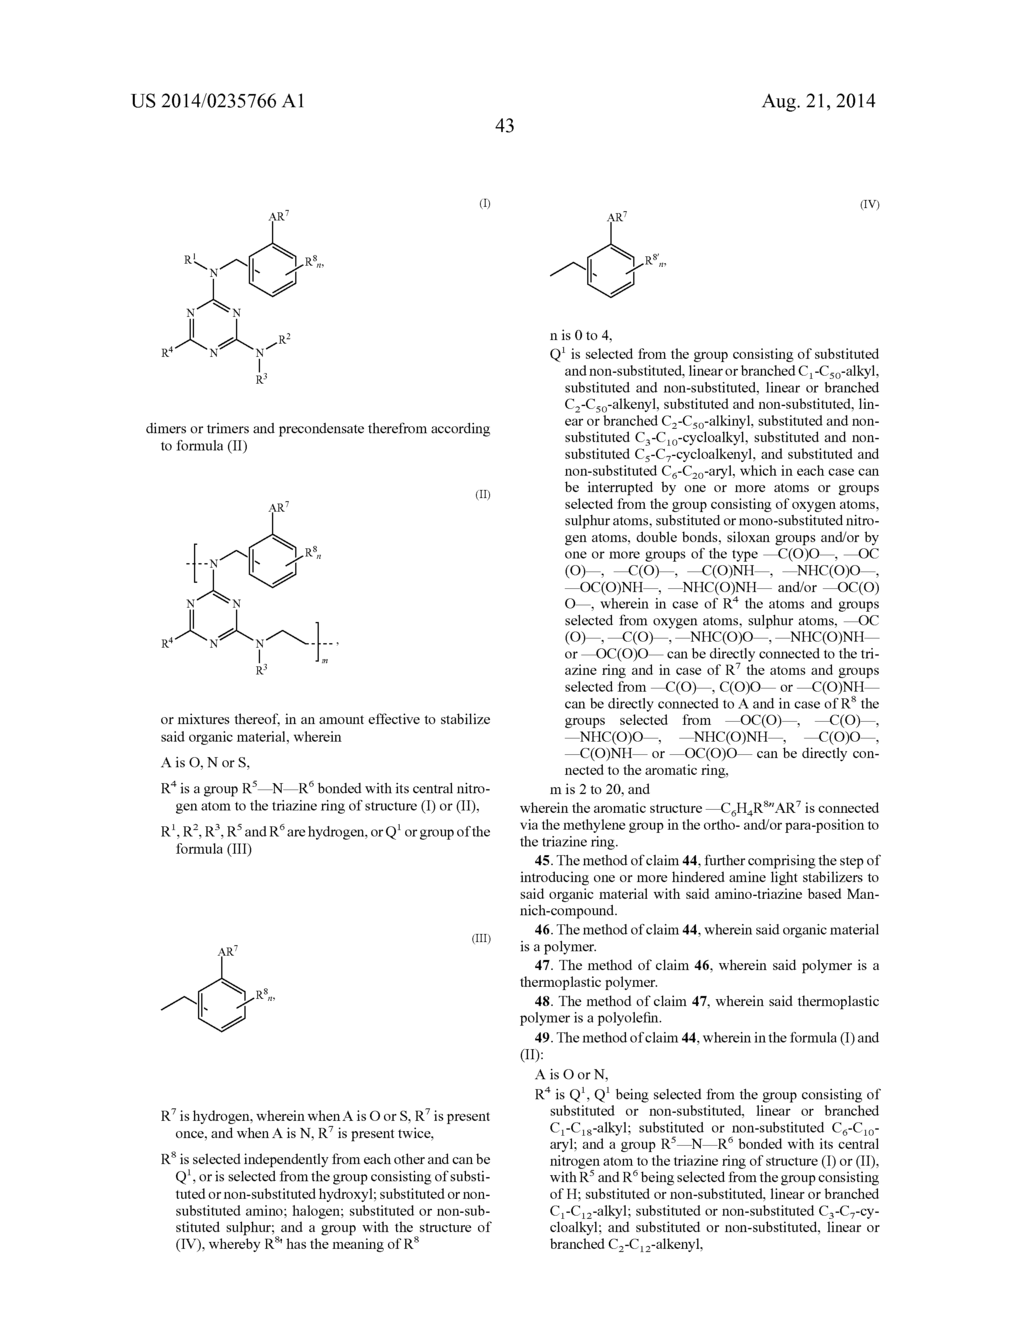 Stabilizing of Organic Material with Amino-Triazine Based     Mannich-Compounds - diagram, schematic, and image 45